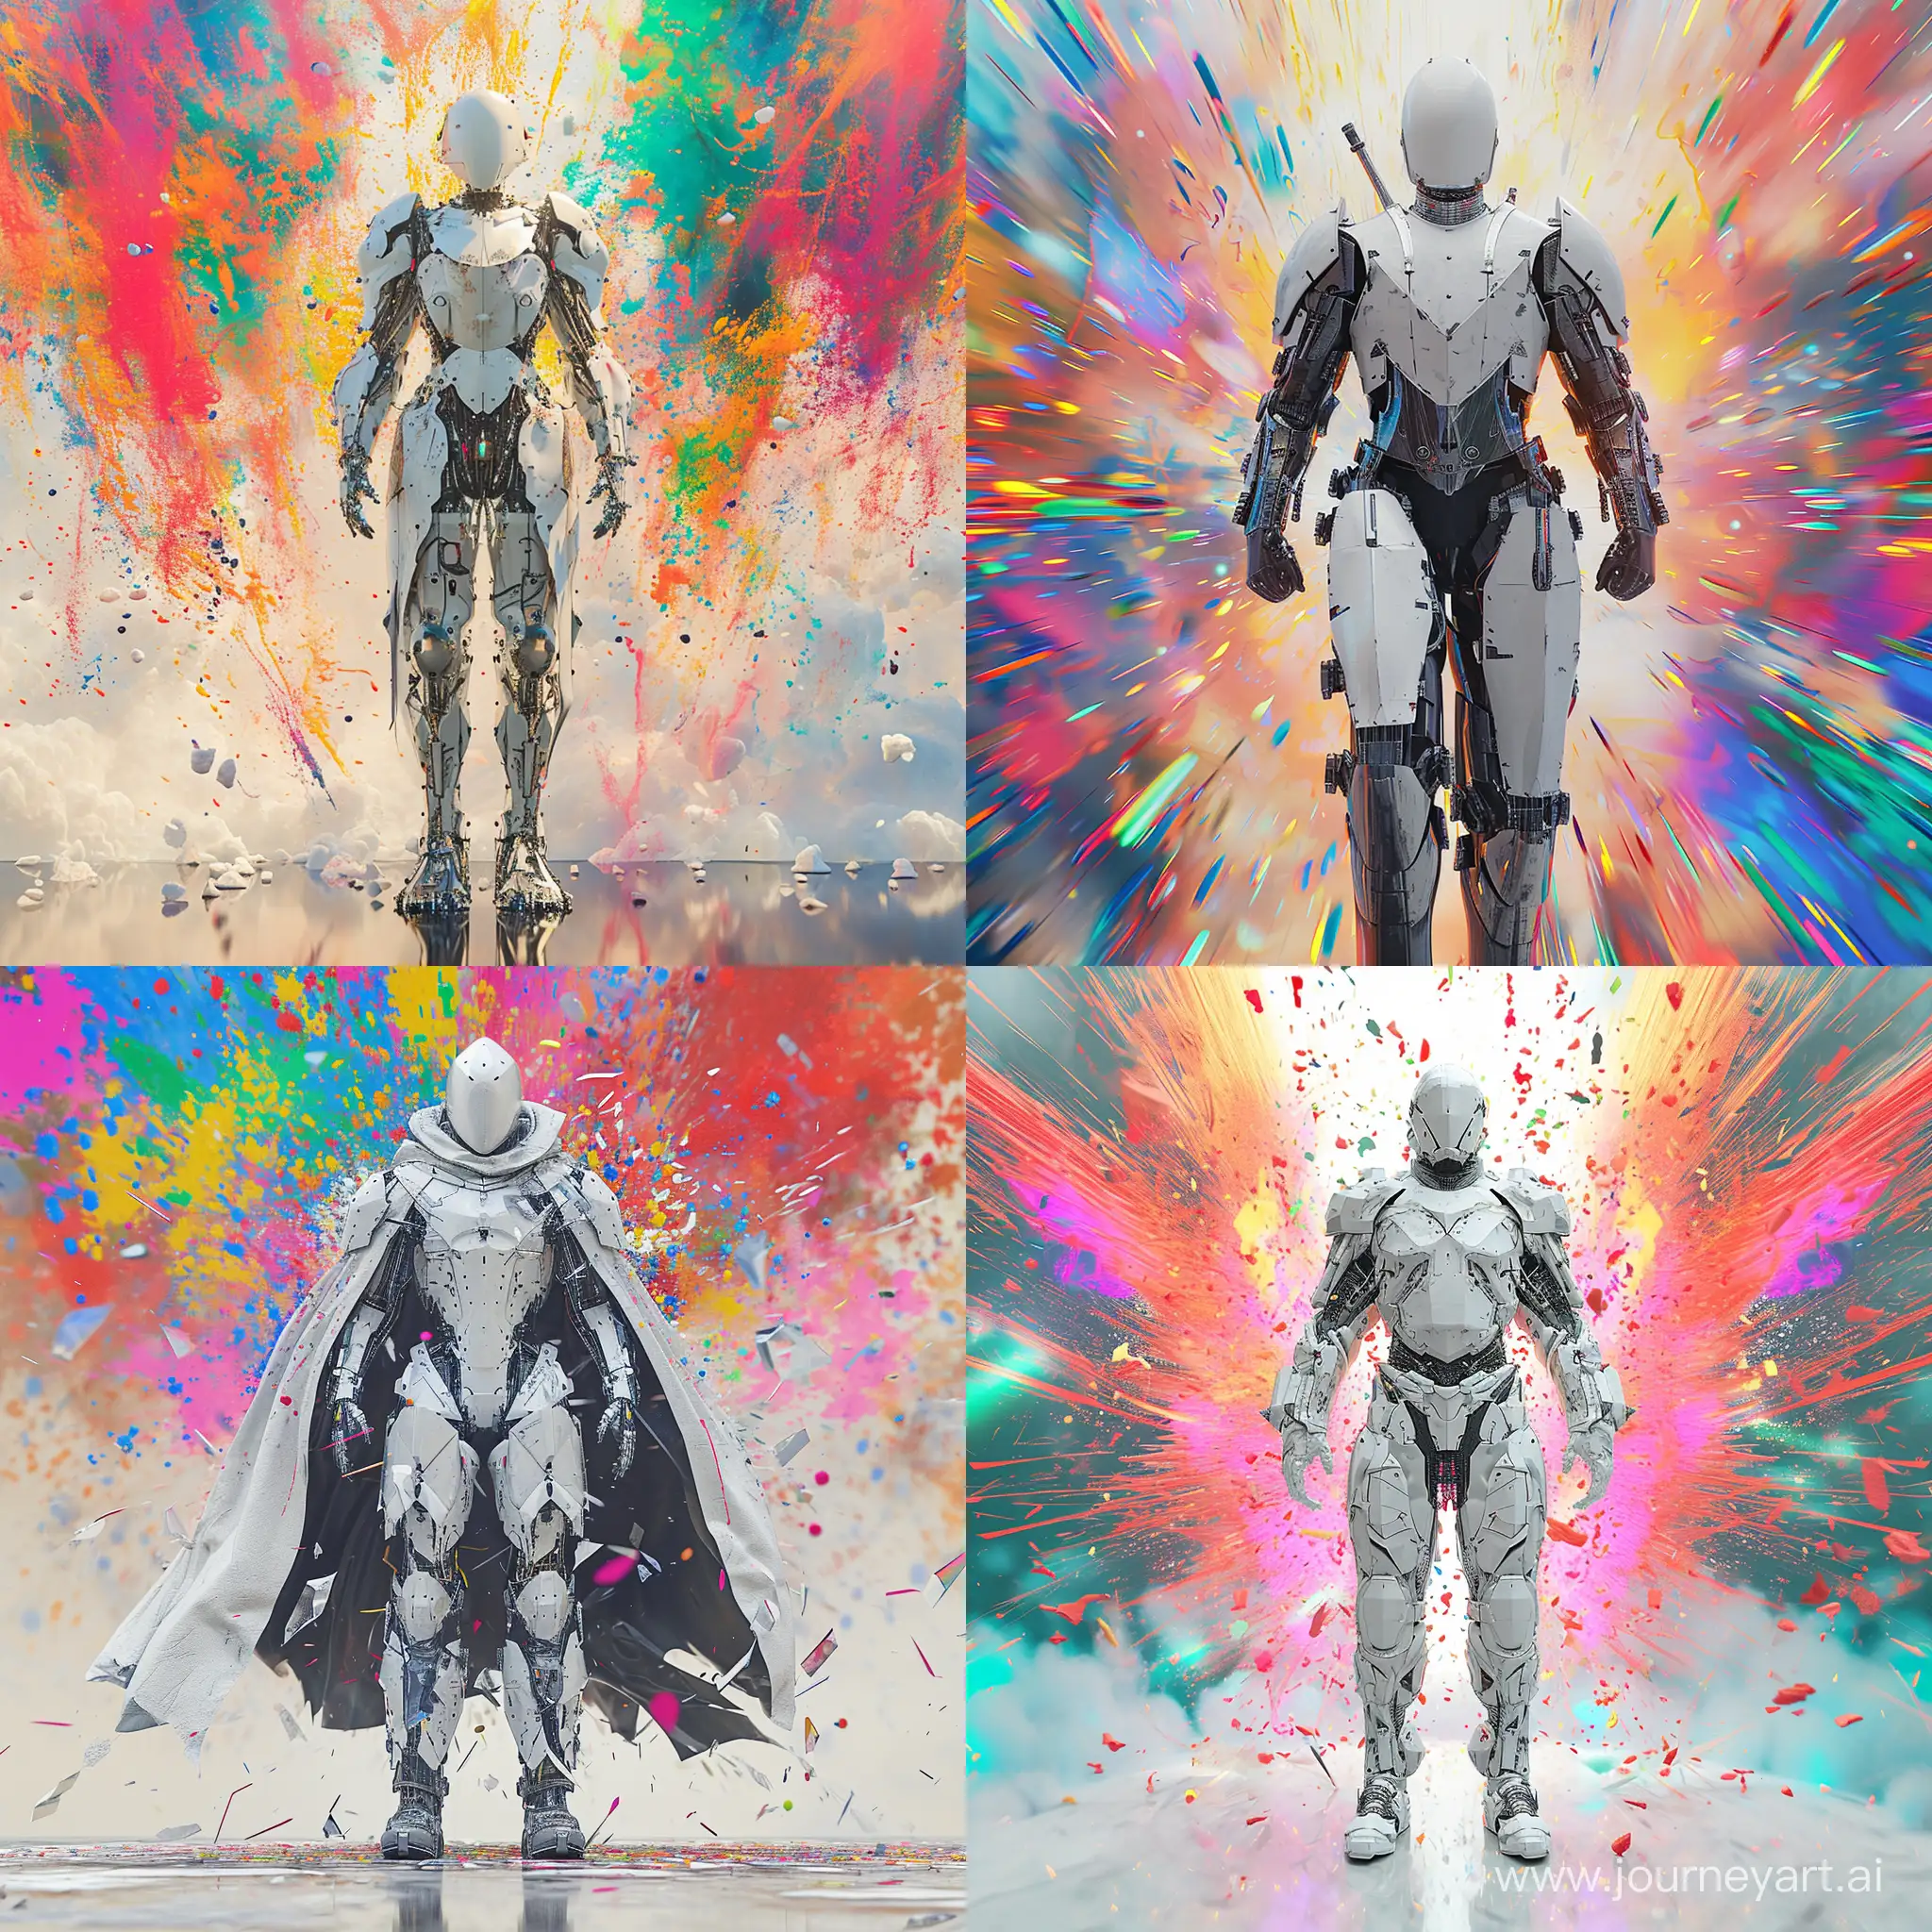 Cybernetic-White-Knight-in-Dazzling-Cyberpunk-Abstraction